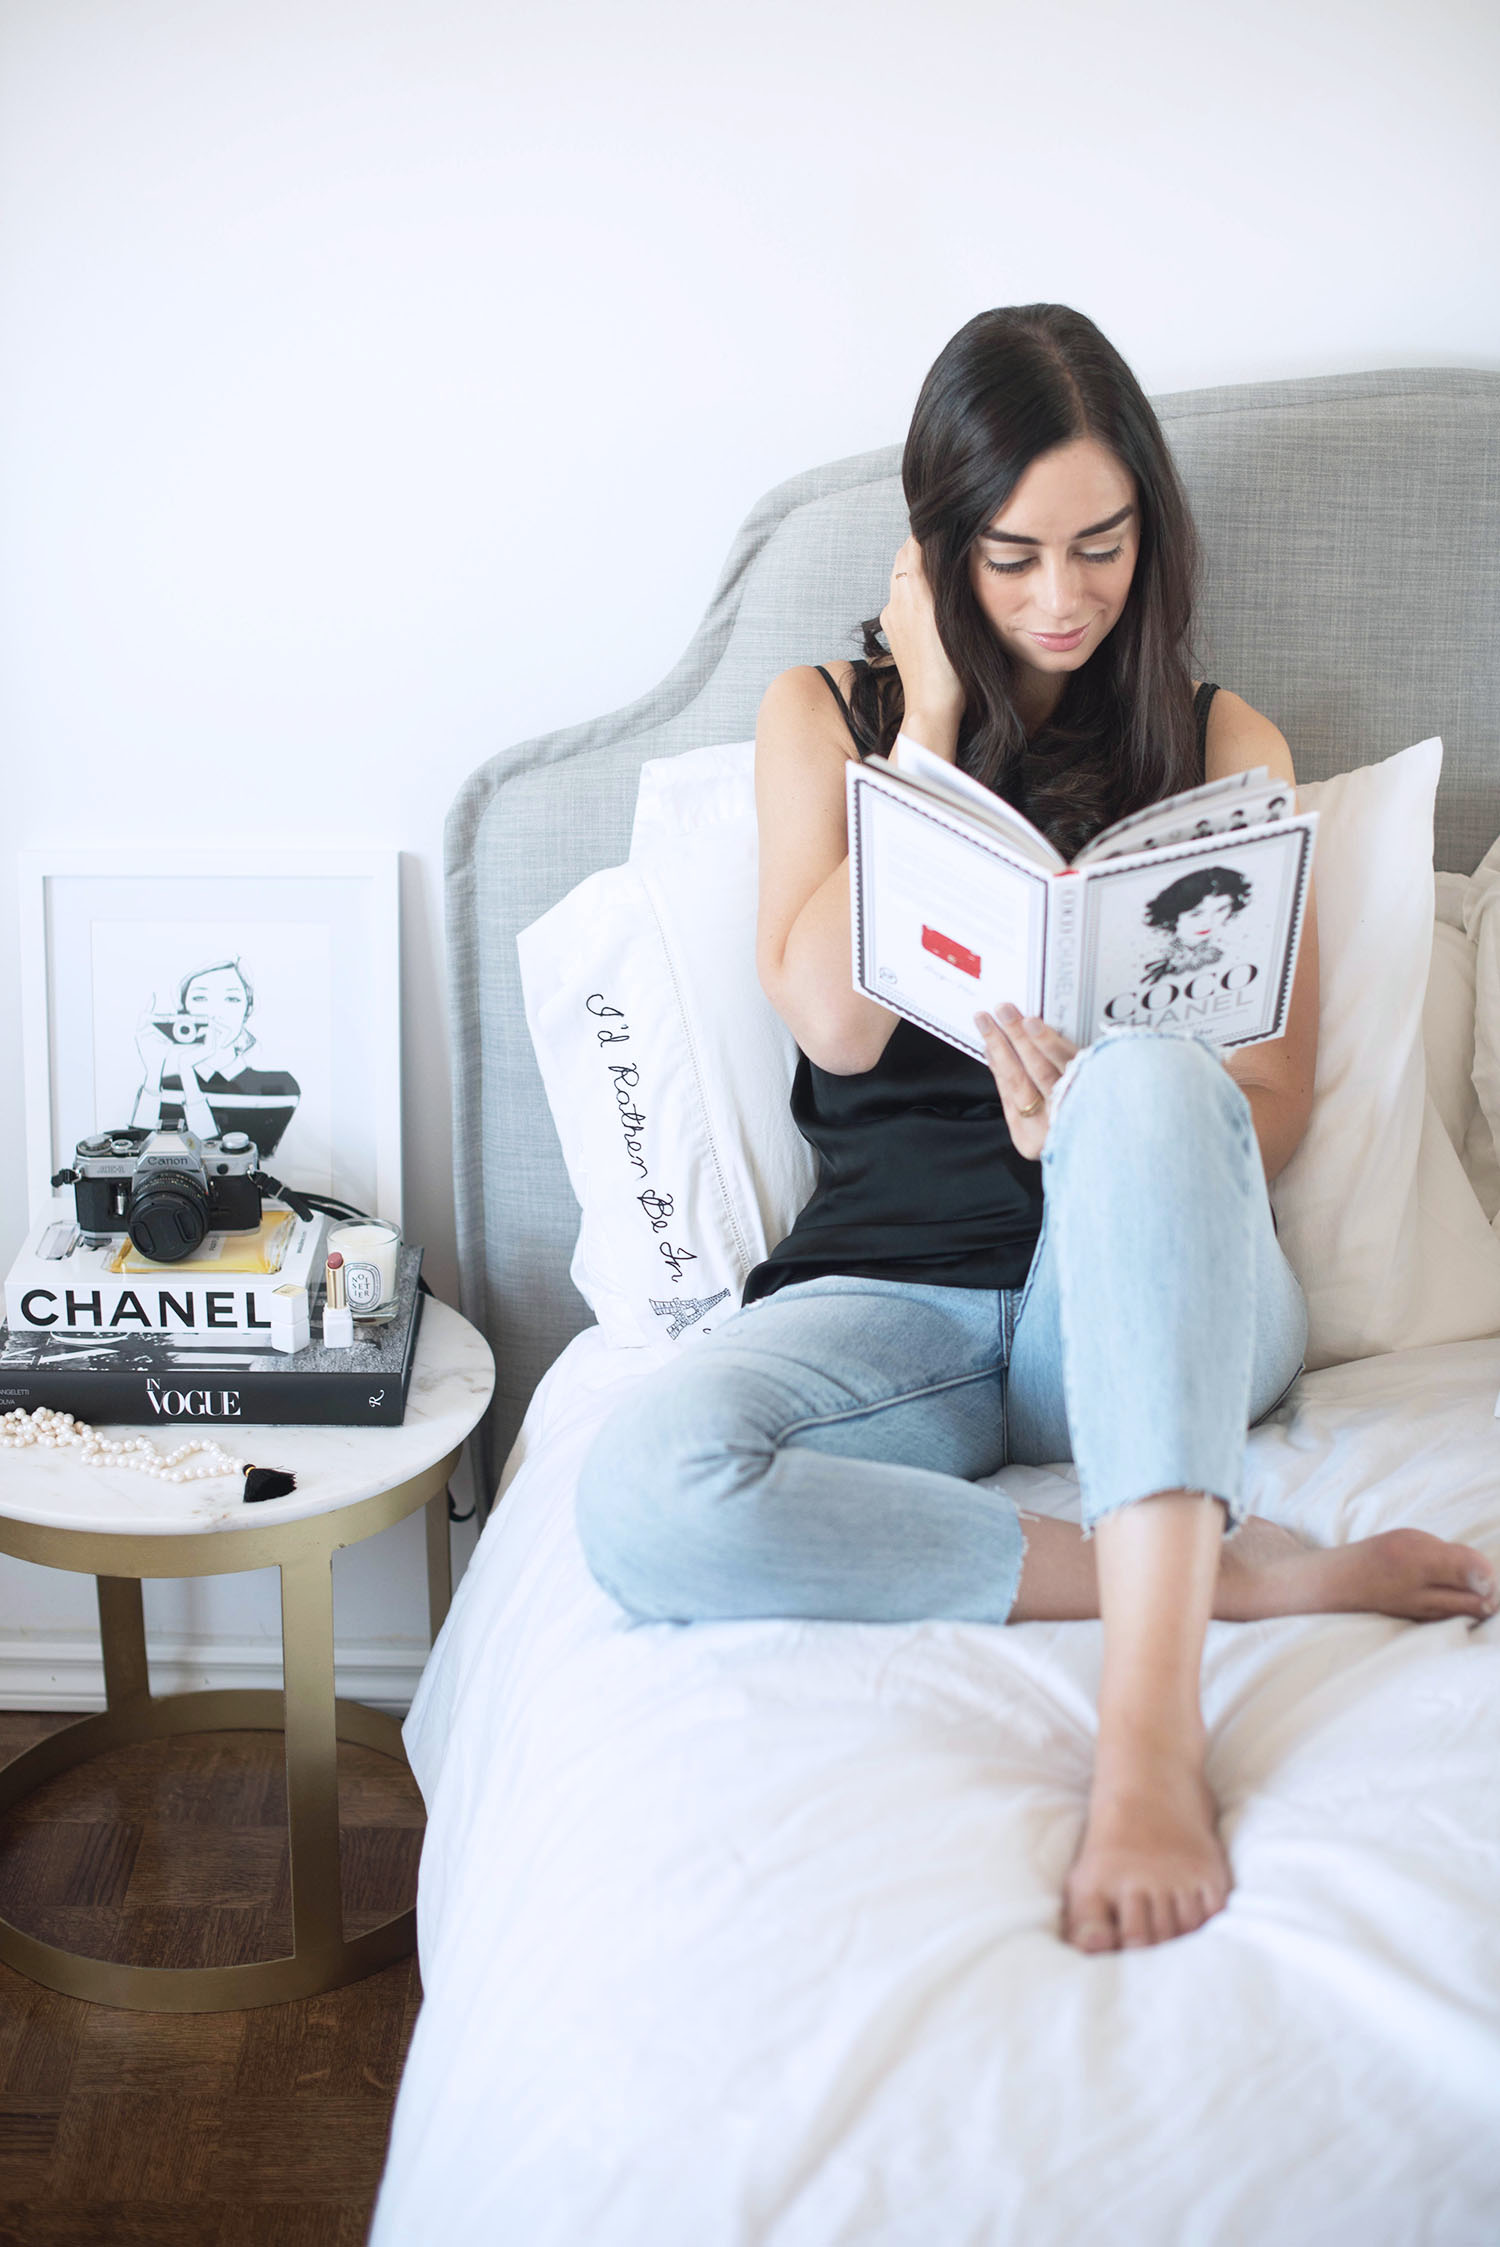 Fashion blogger Cee Fardoe of Coco & Vera sis on her bed reading Coco Chanel by Megan Hess, wearing Levi's jeans and an Aritzia silk tank